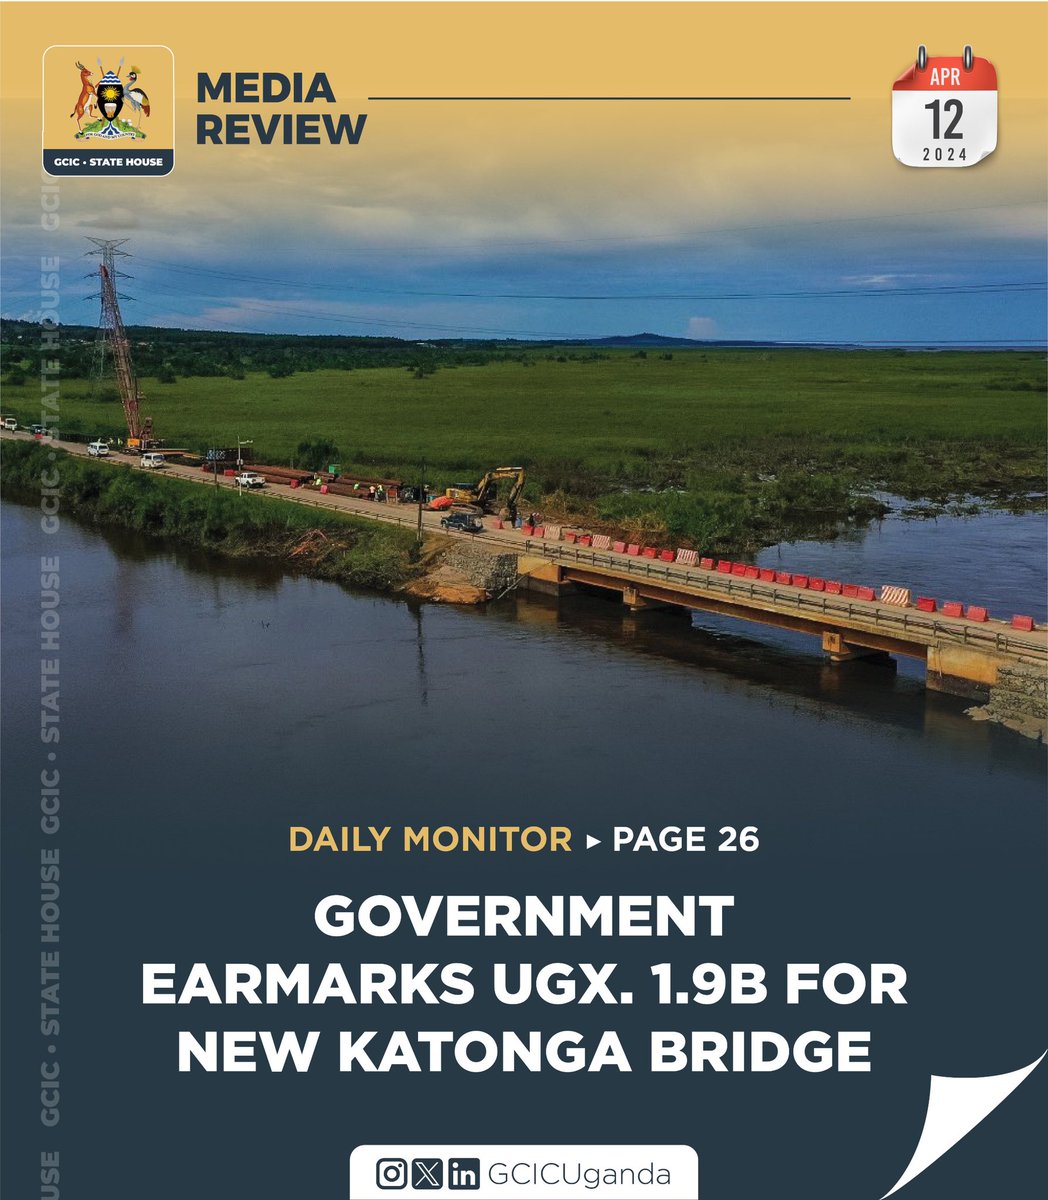 This Friday in the papers; 📌 Uganda, South Sudan agree to strengthen trade 📌 Farmers tipped on crops to plant as rains intensify 📌 @narouganda to start production of Anti-Tick Vaccine 📌 @GovUganda earmarks UGX 1.9b for new Katonga bridge #GCICMediaReview #OpenGovUg…